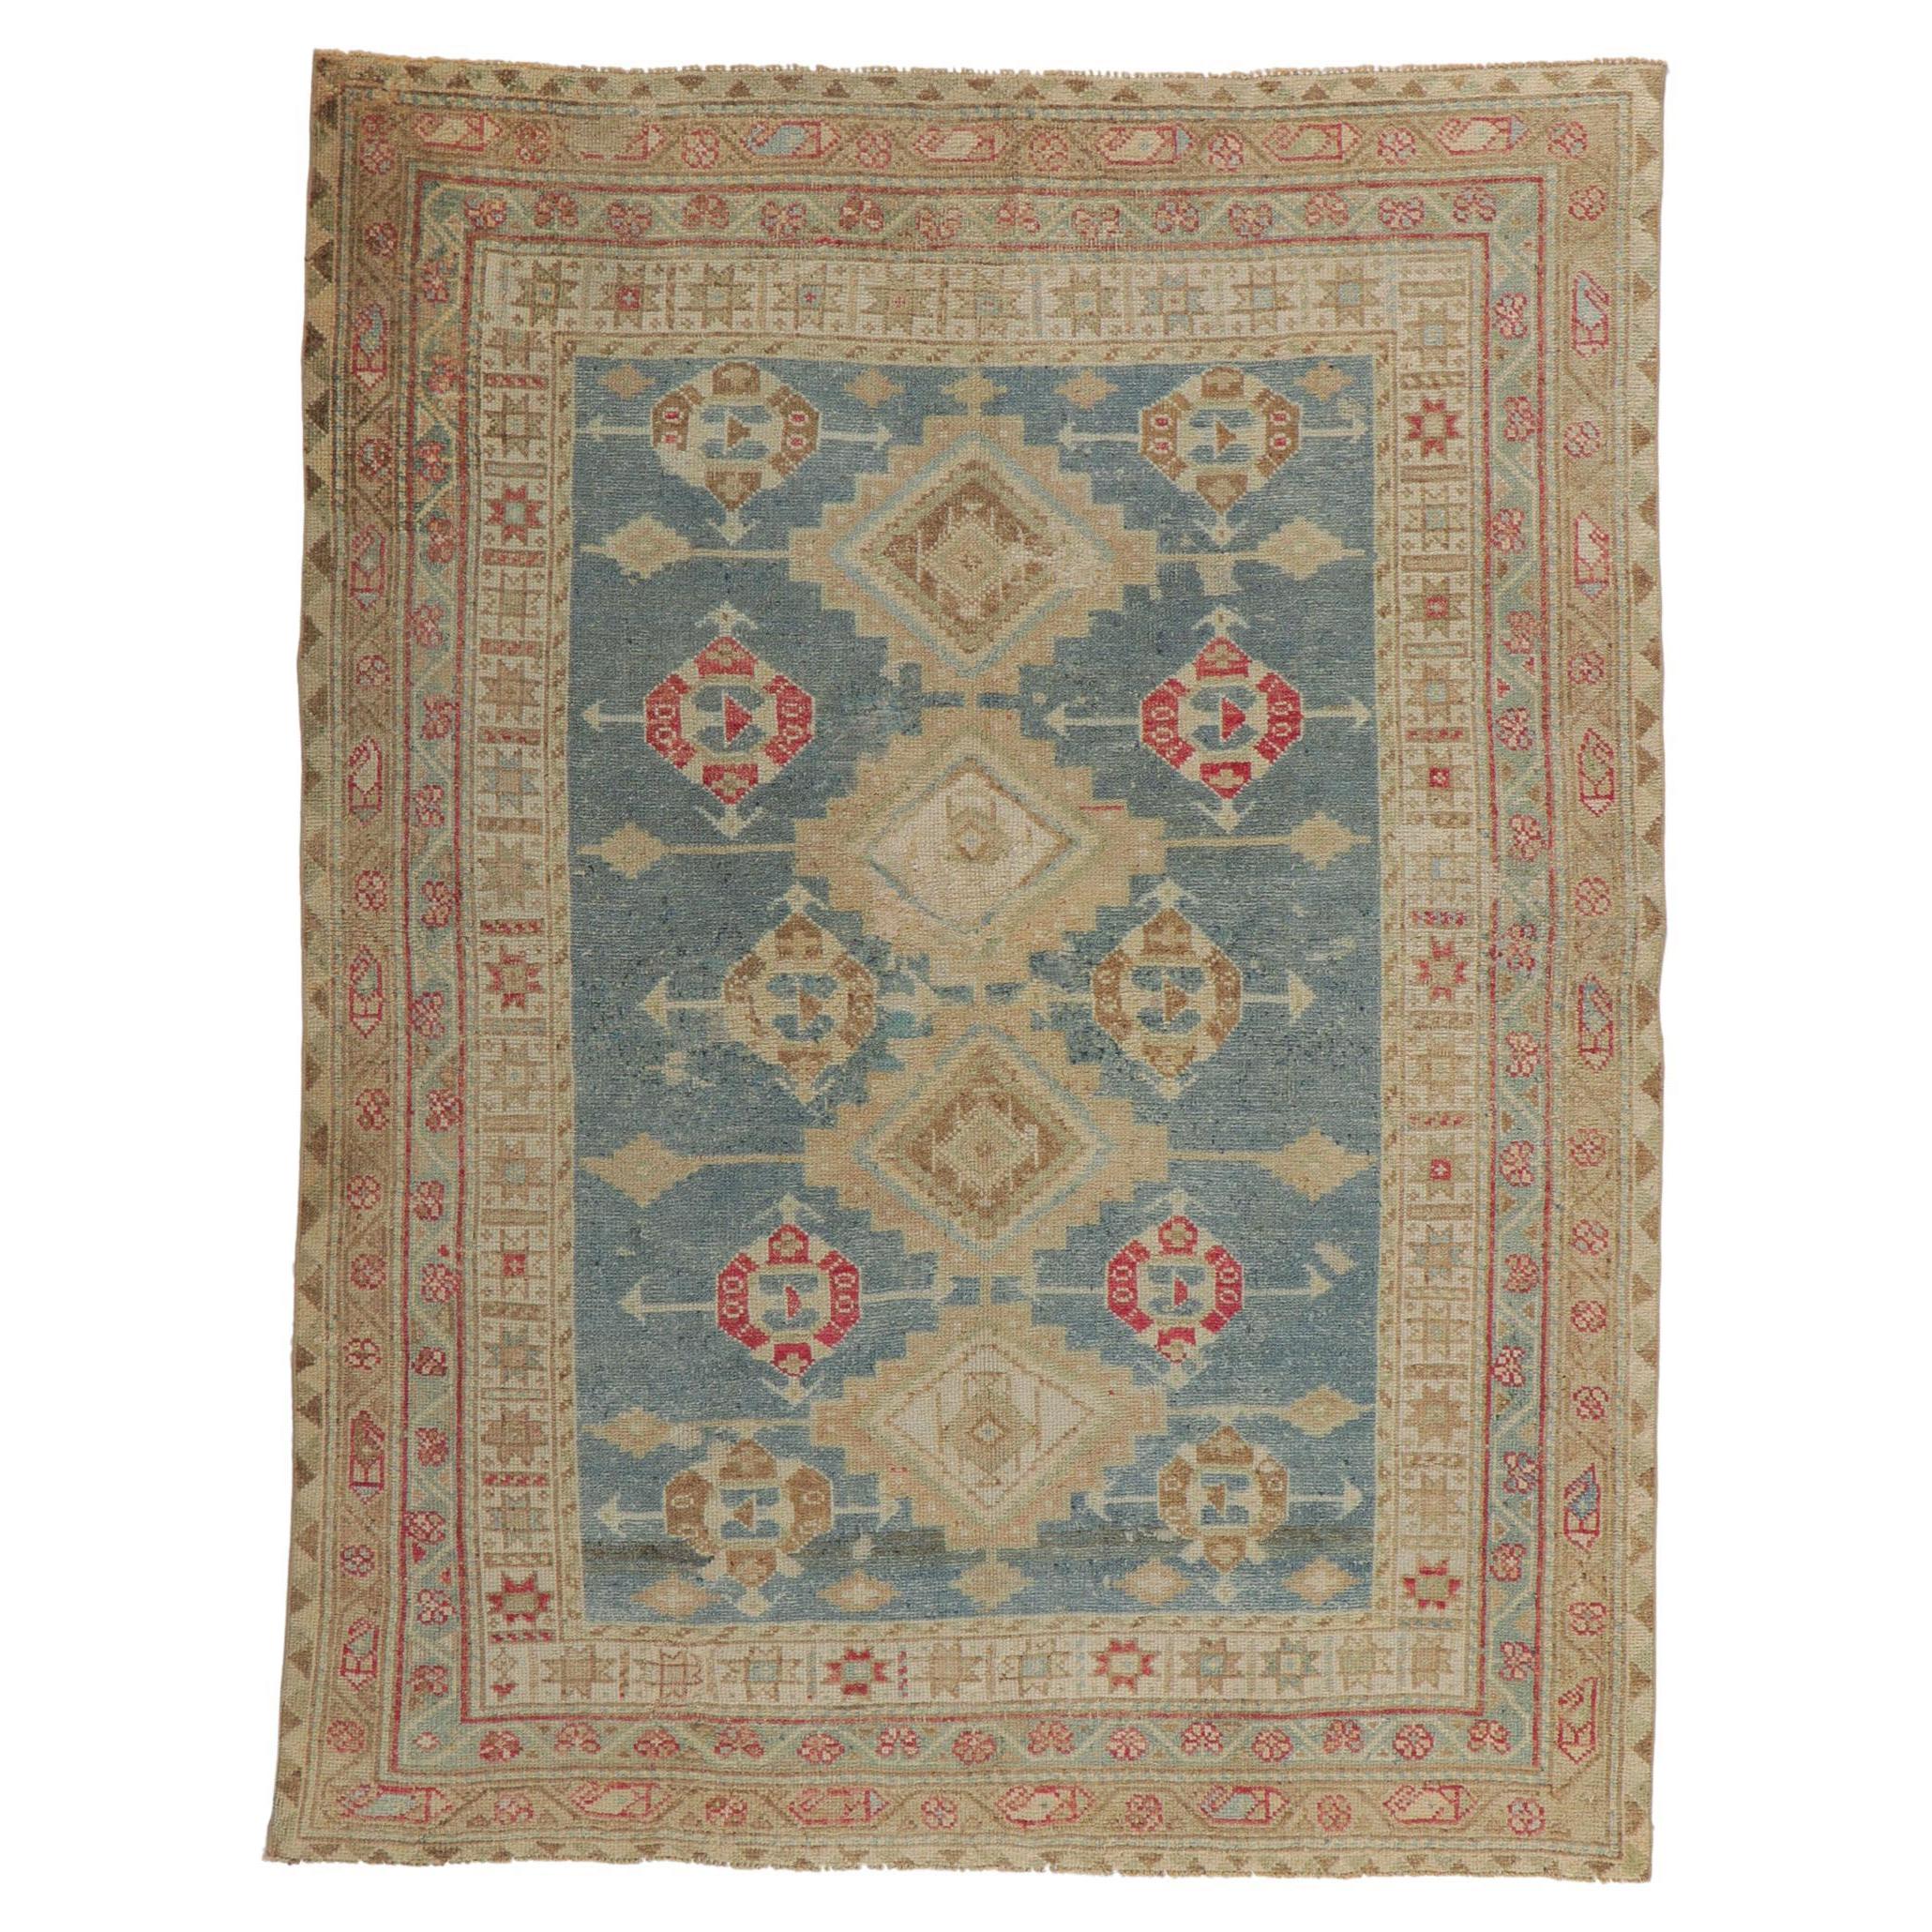 Antique Persian Shiraz Rug with Tribal Style